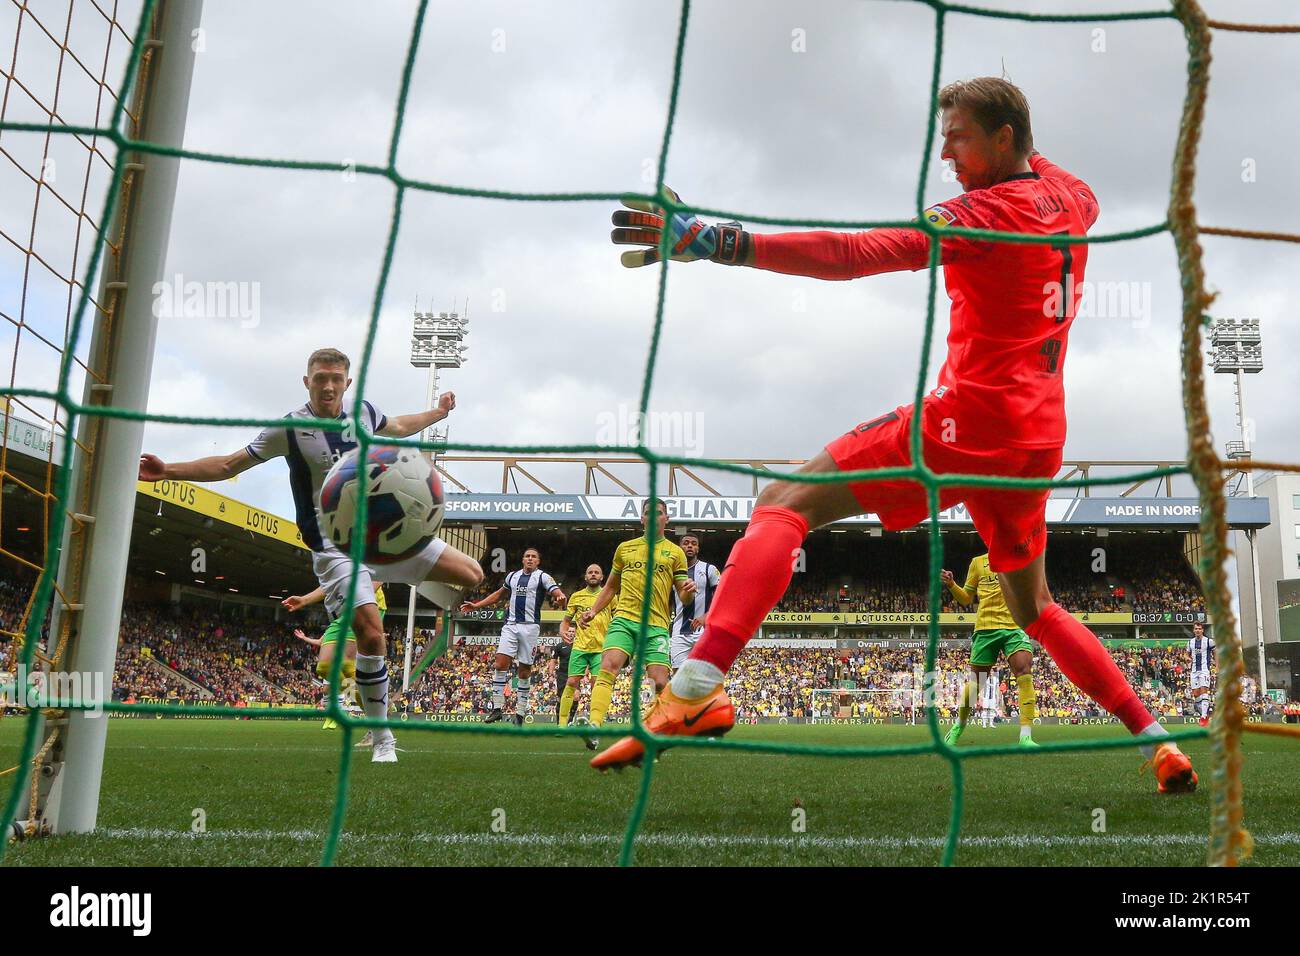 Dara O'Shea of West Bromwich Albion scores a goal to make it 1-0 - Norwich City v West Bromwich Albion, Sky Bet Championship, Carrow Road, Norwich, UK - 17th September 2022  Editorial Use Only - DataCo restrictions apply Stock Photo